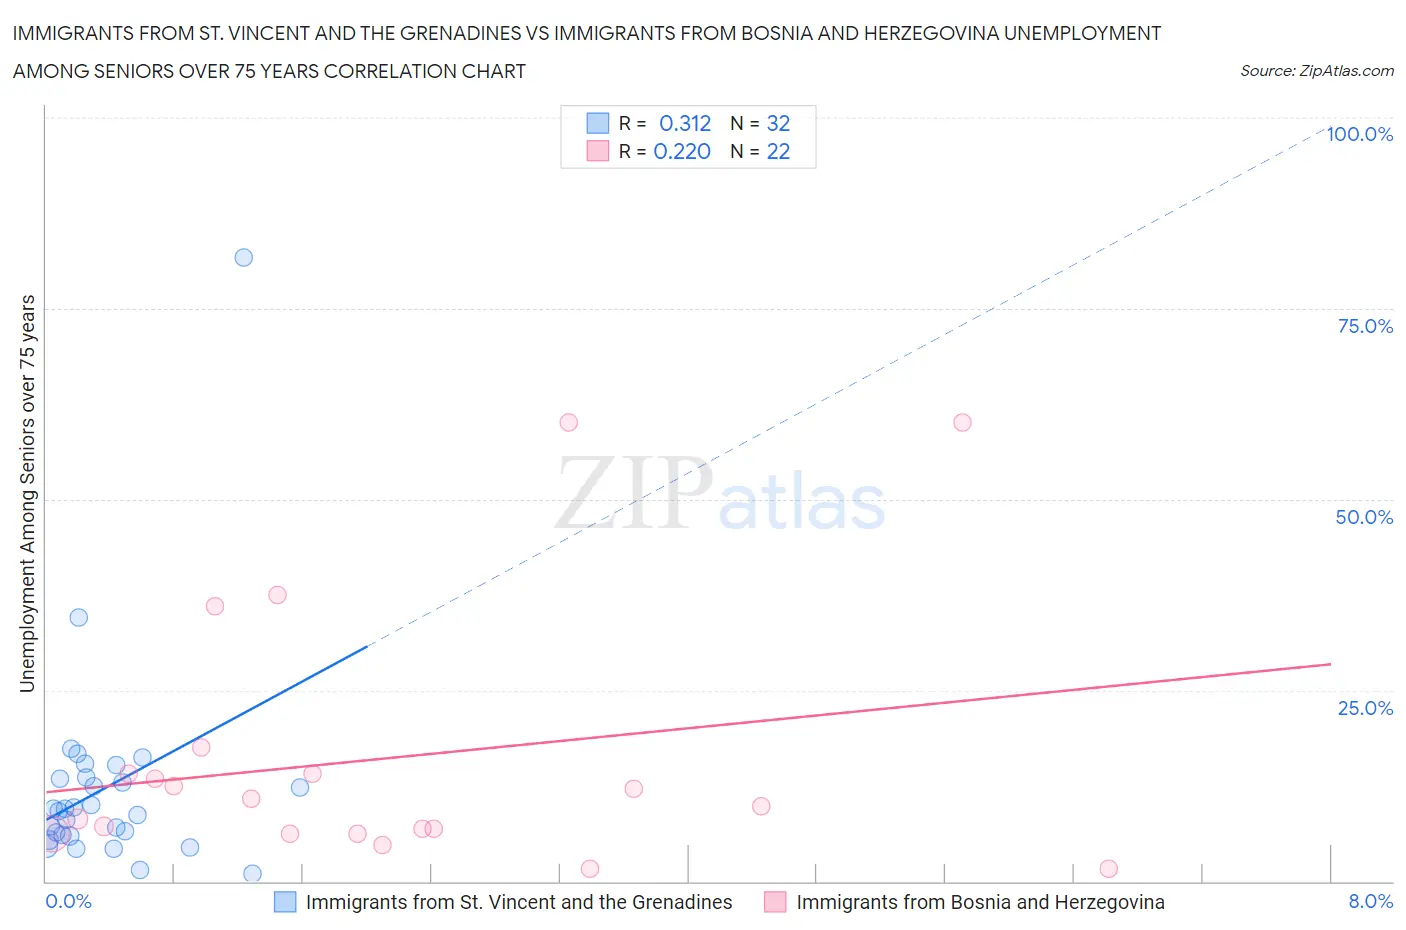 Immigrants from St. Vincent and the Grenadines vs Immigrants from Bosnia and Herzegovina Unemployment Among Seniors over 75 years